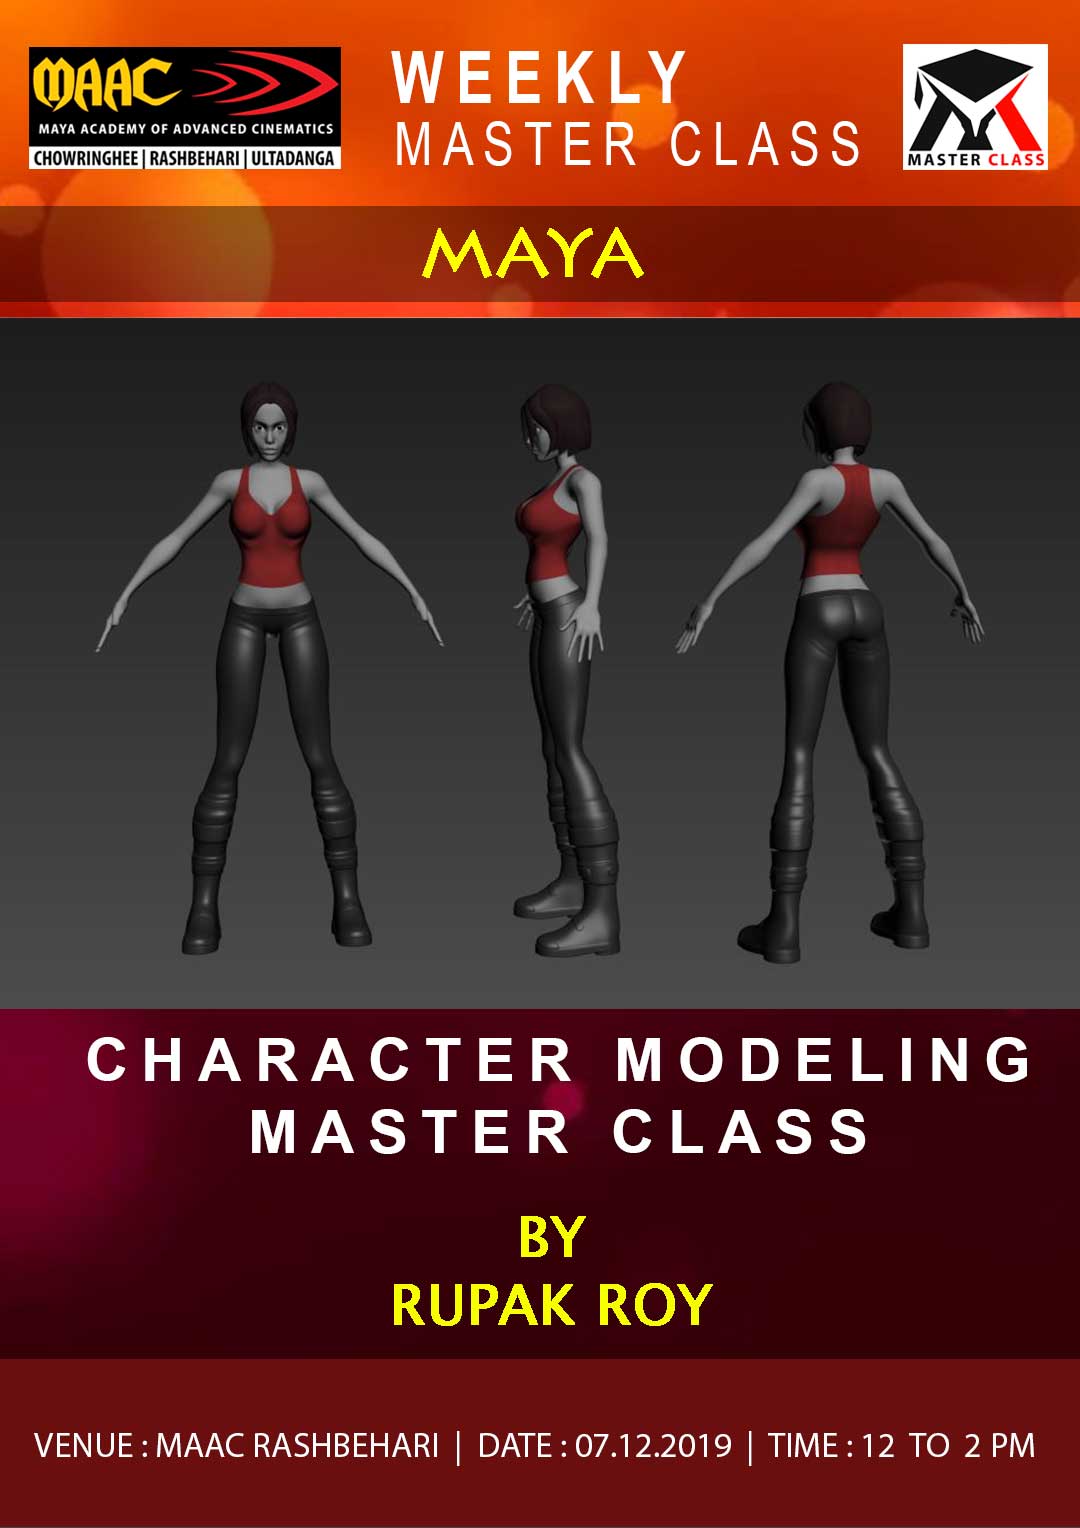 Weekly Master Class on Character Modeling in Maya